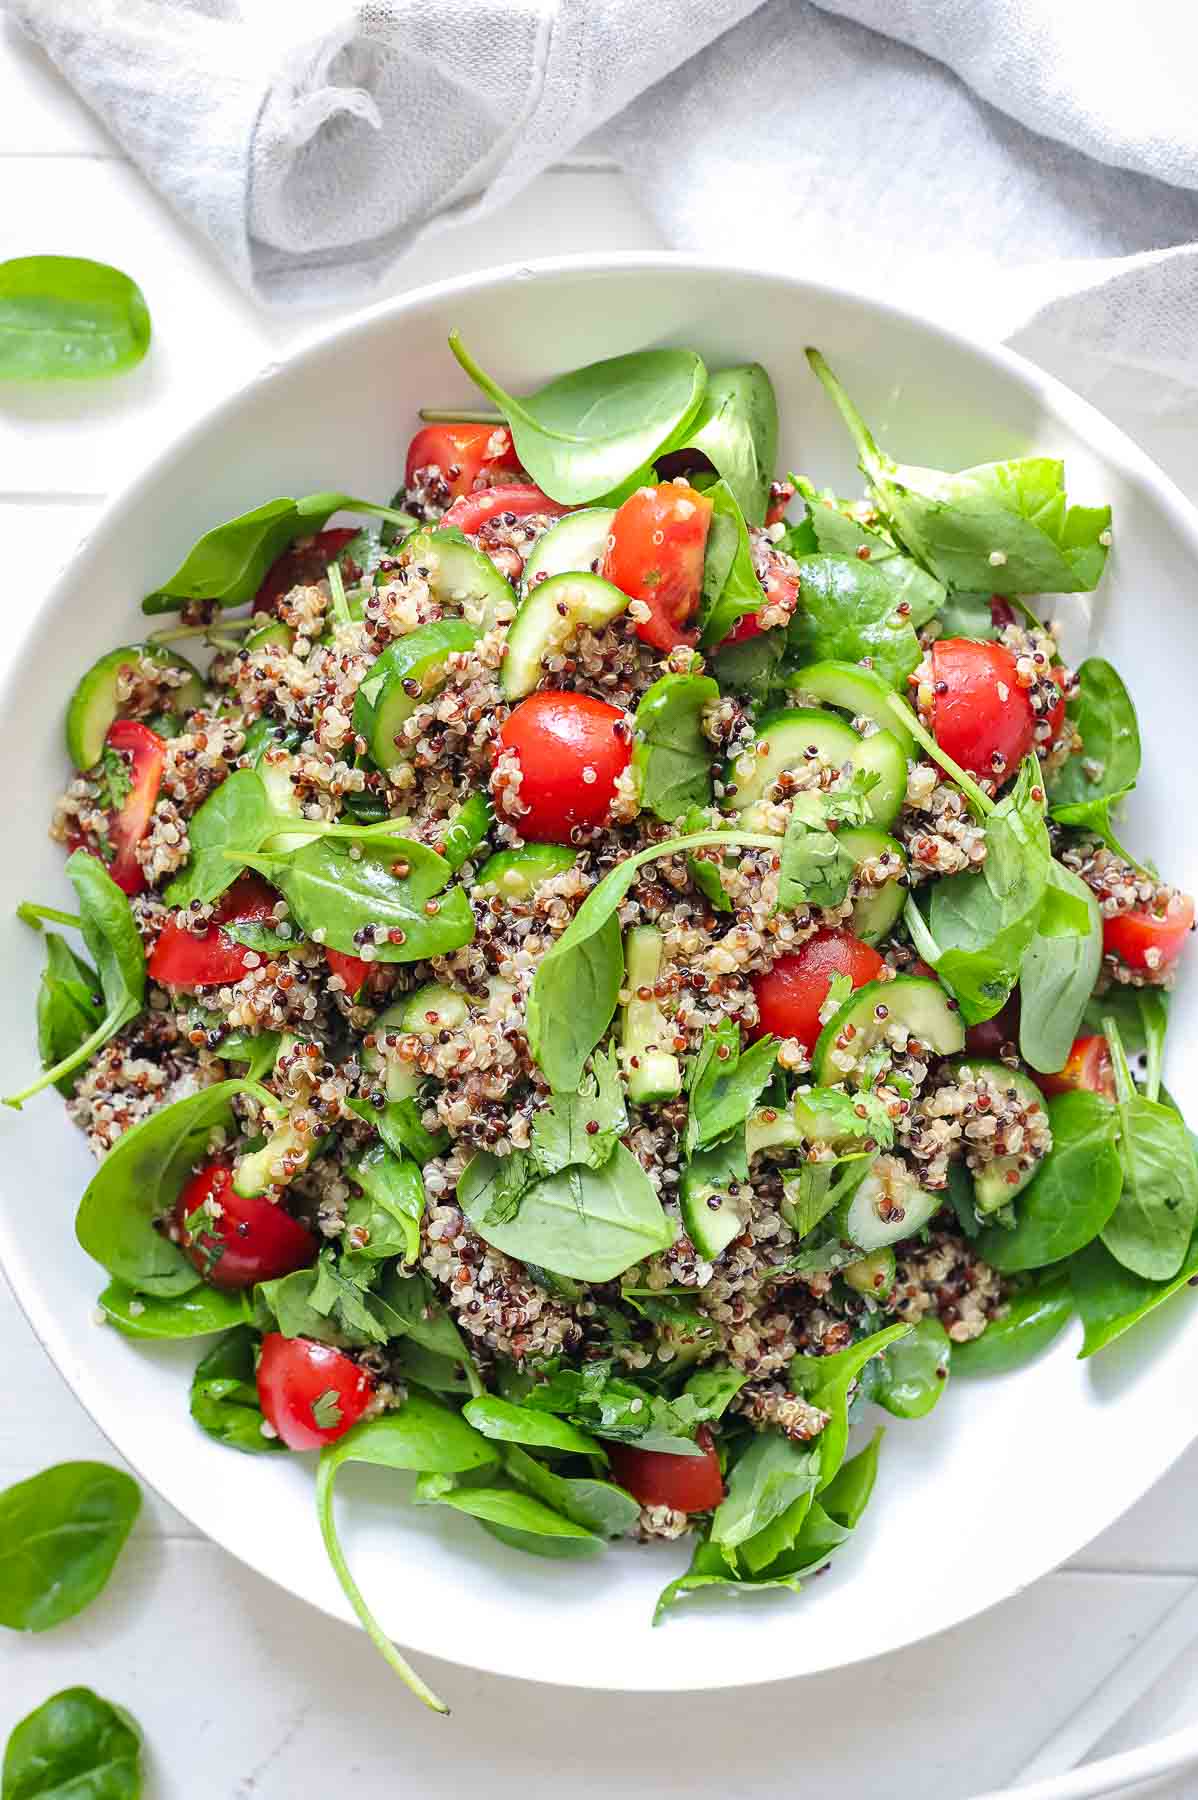 Quinoa Salad with Tomato, Cucumber and Spinach